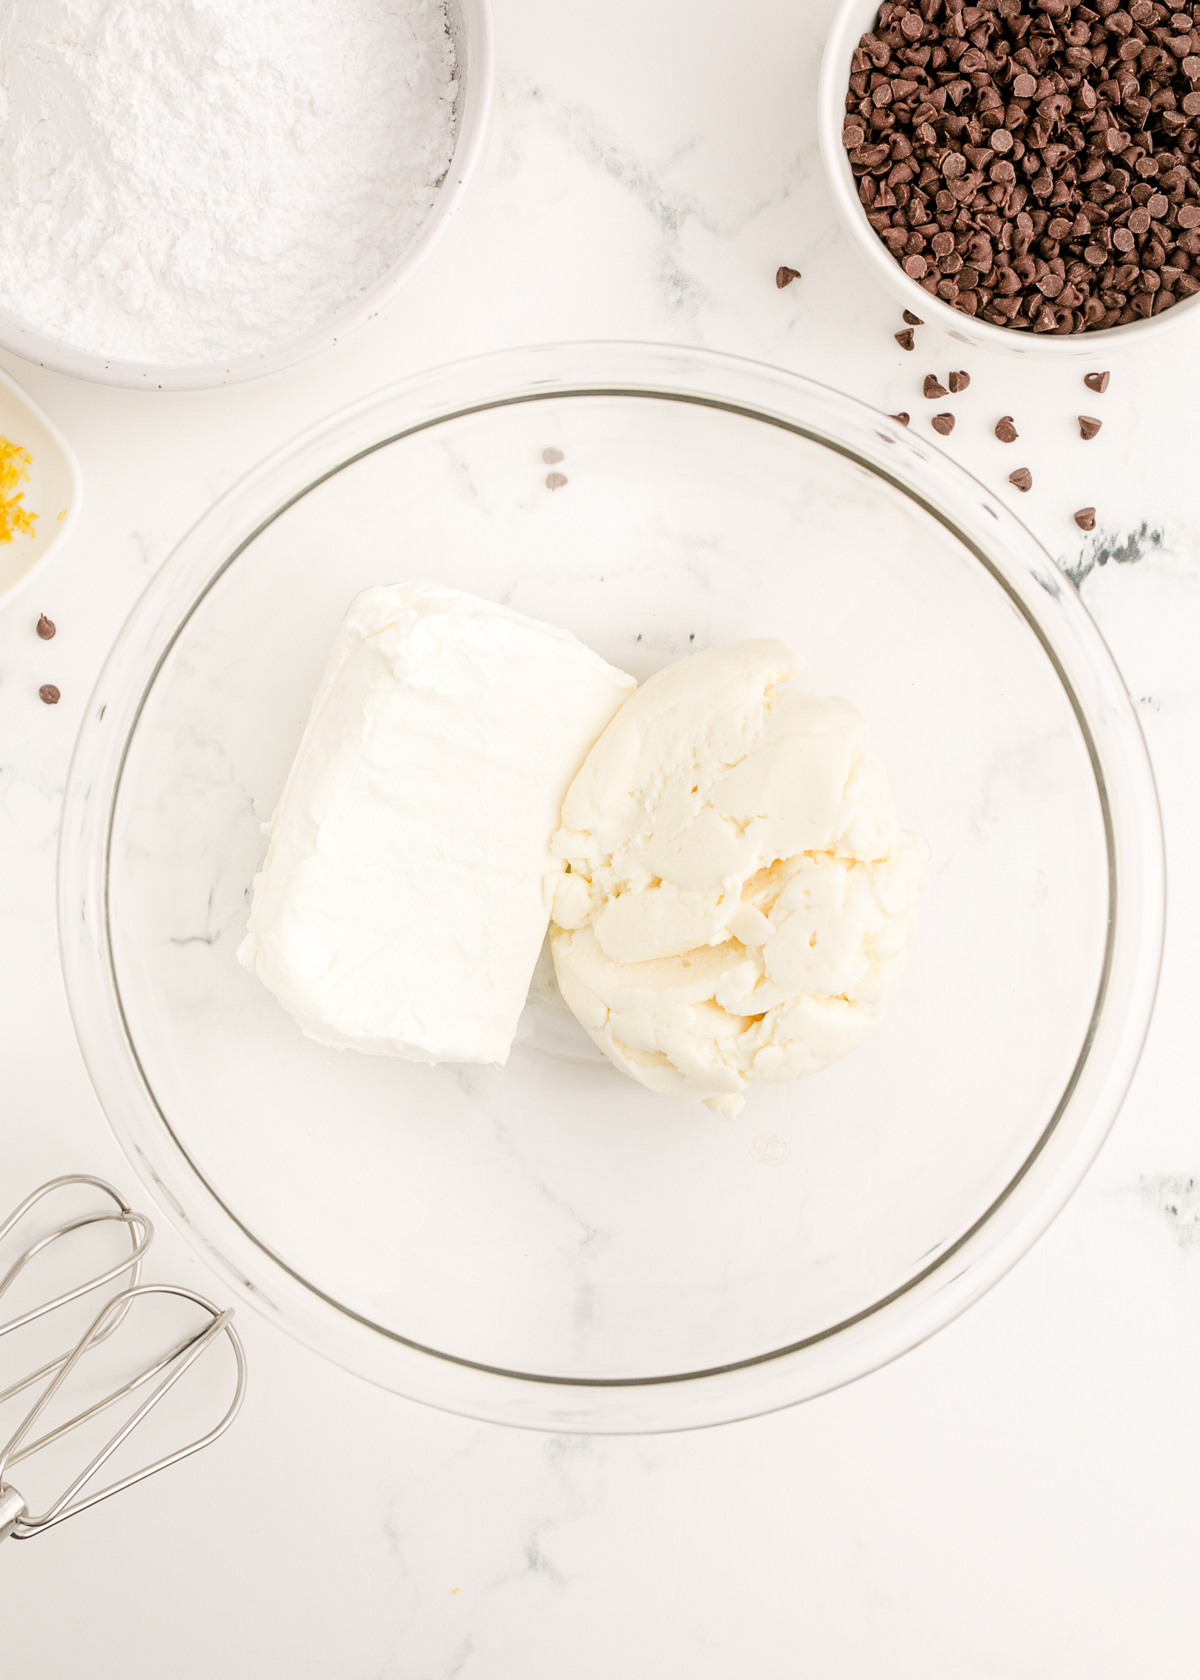 cream cheese and ricotta in a glass bowl